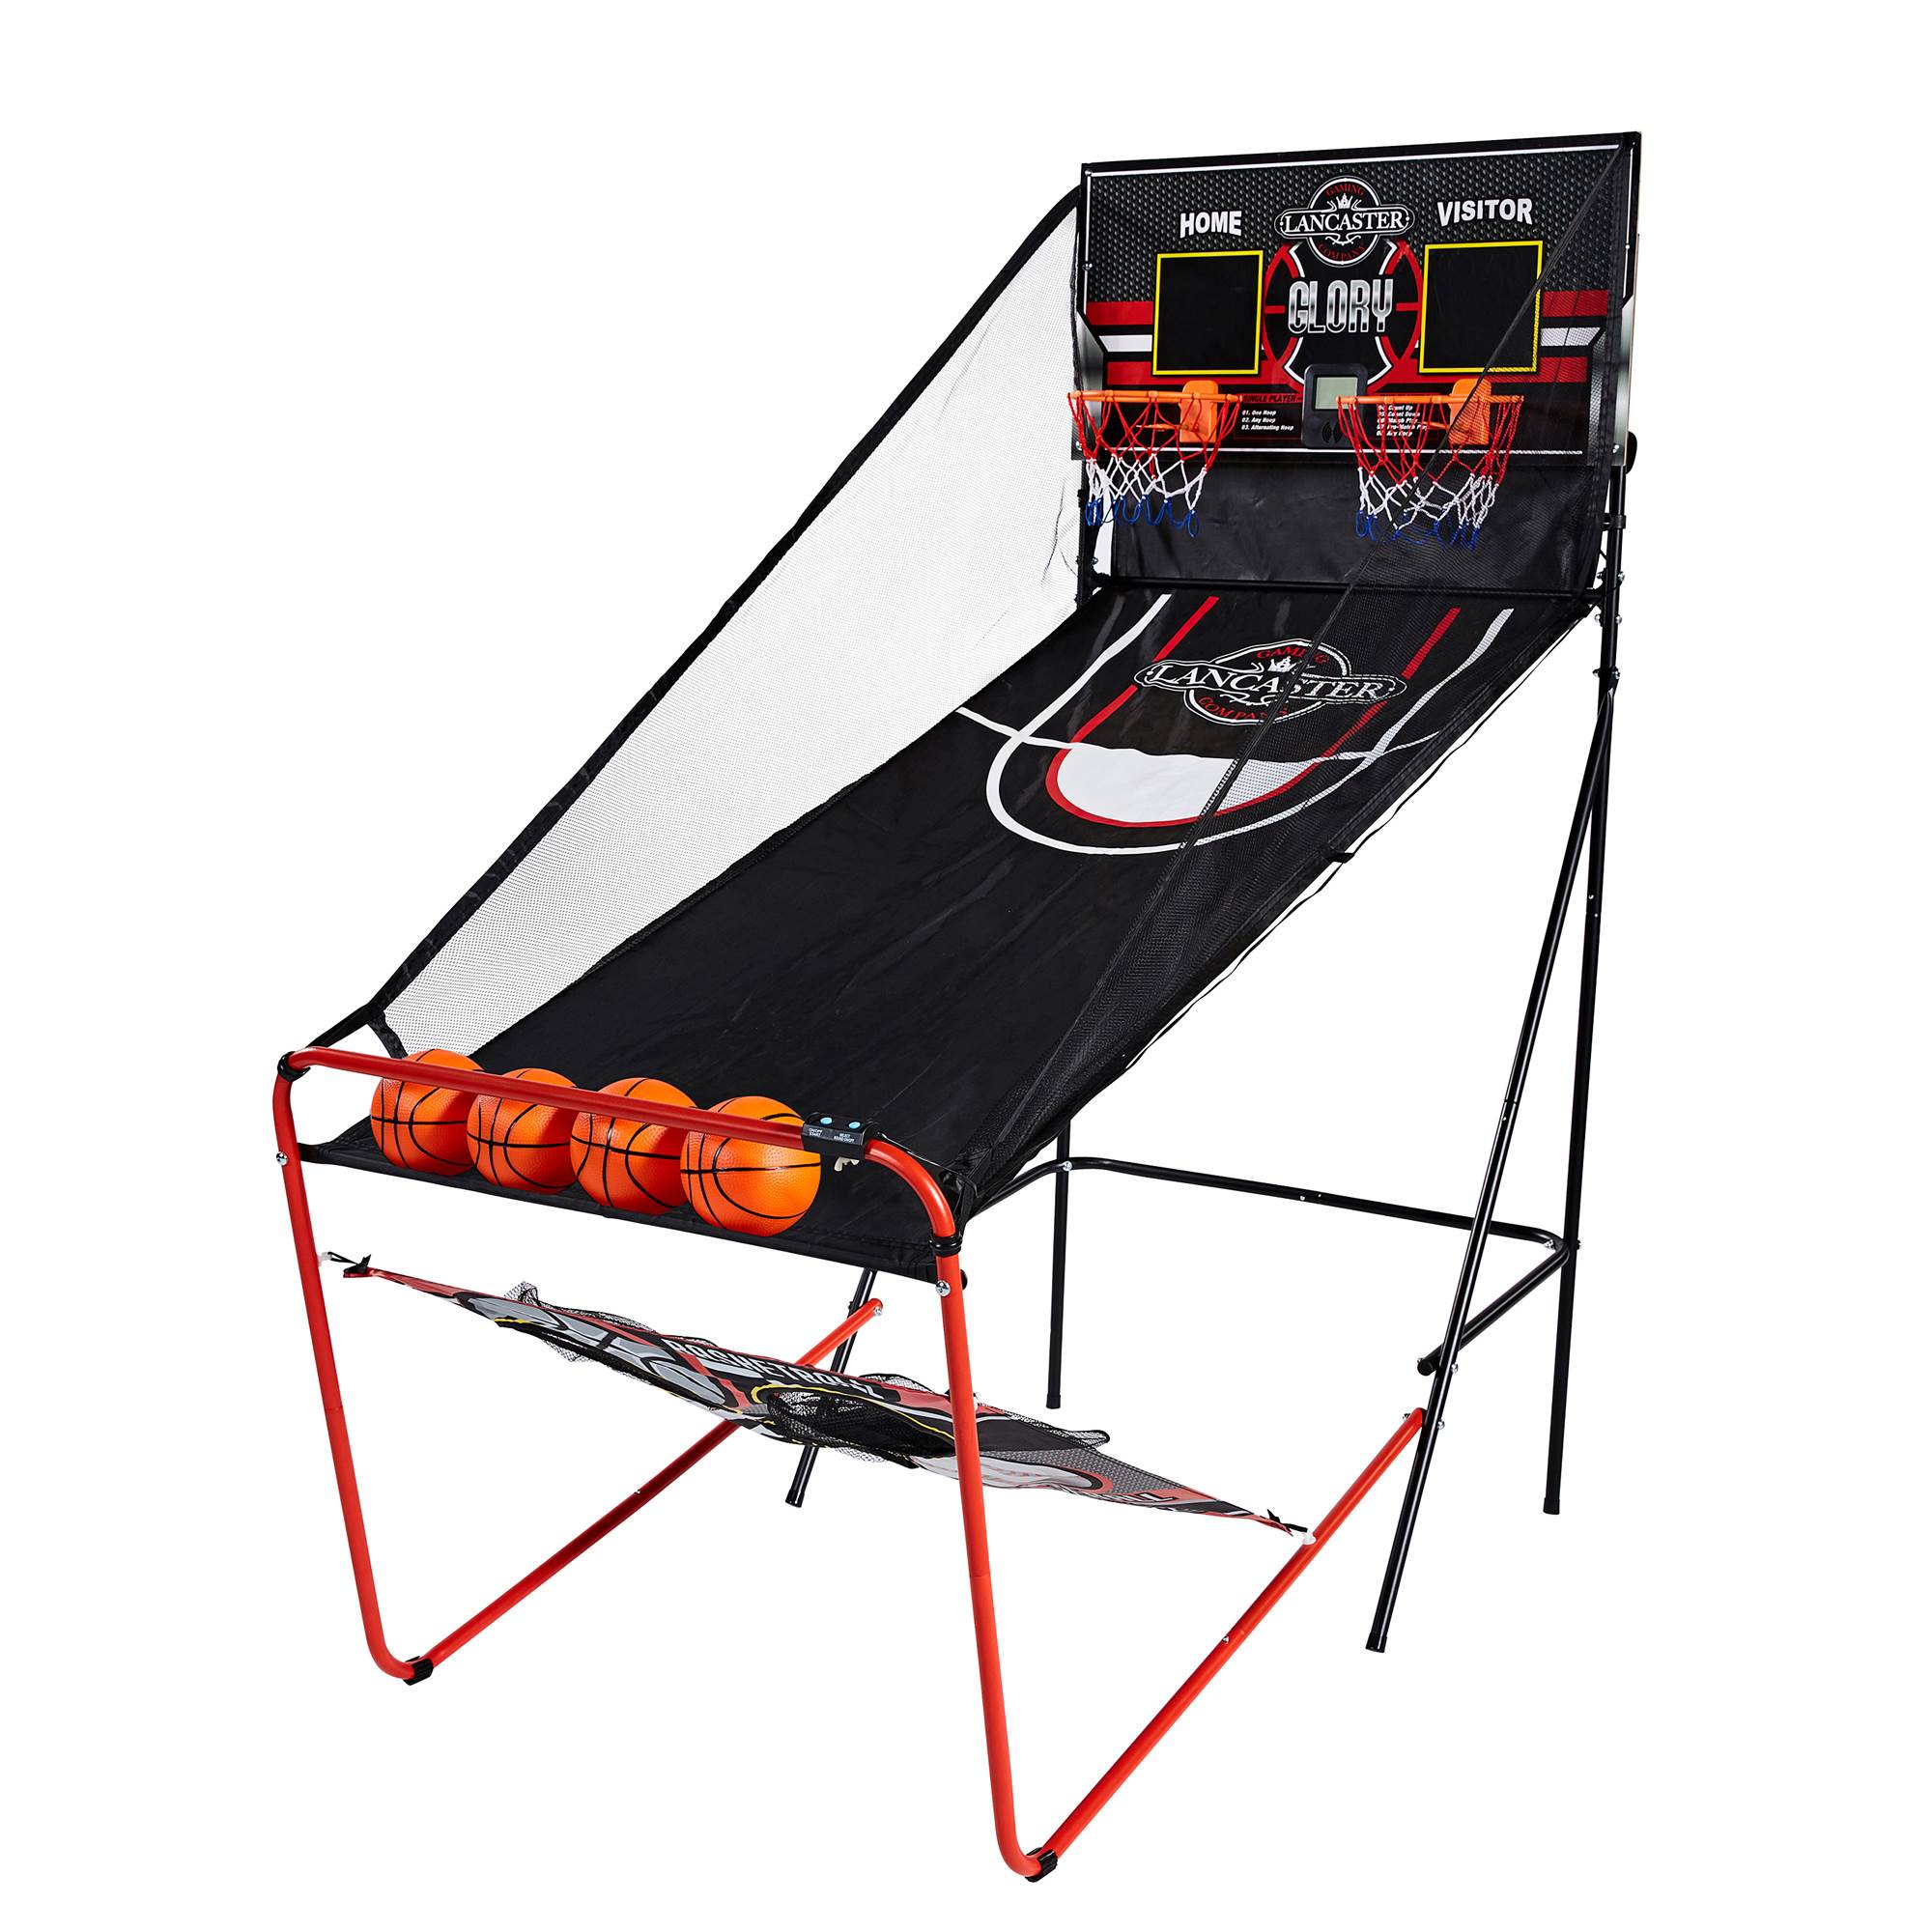  LOYALHEARTDY Basketball Arcade Game Indoor, Arcade Games  Machines for Home, Basketball Game Indoor with LED Electronic Scorer and  Timer for 2 Players : Sports & Outdoors